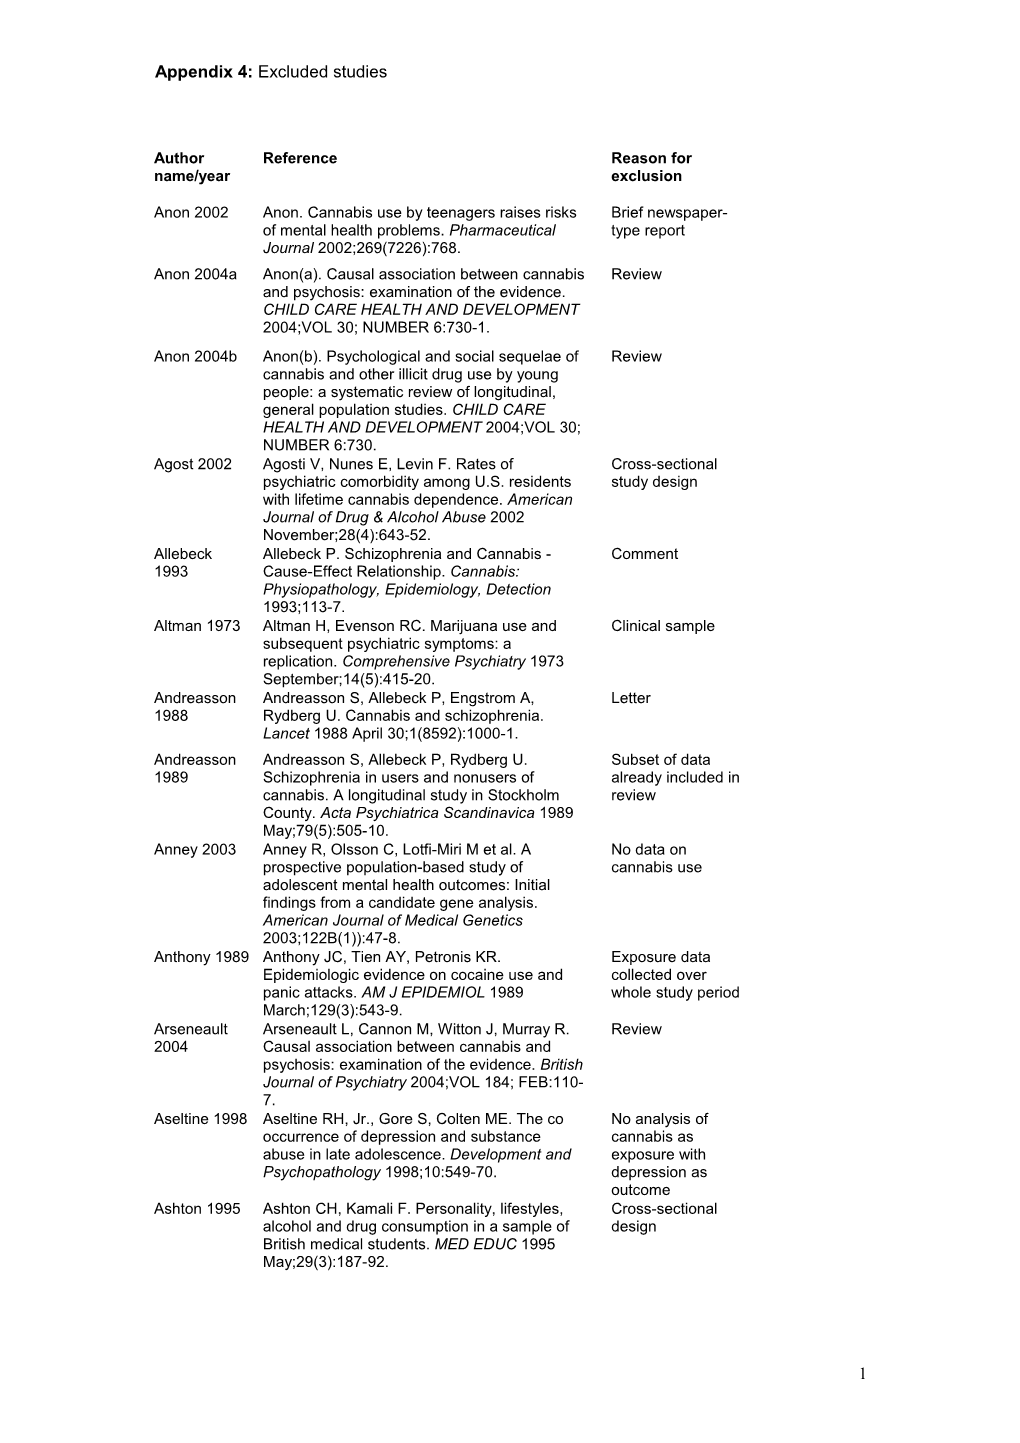 Table of Excluded Studies